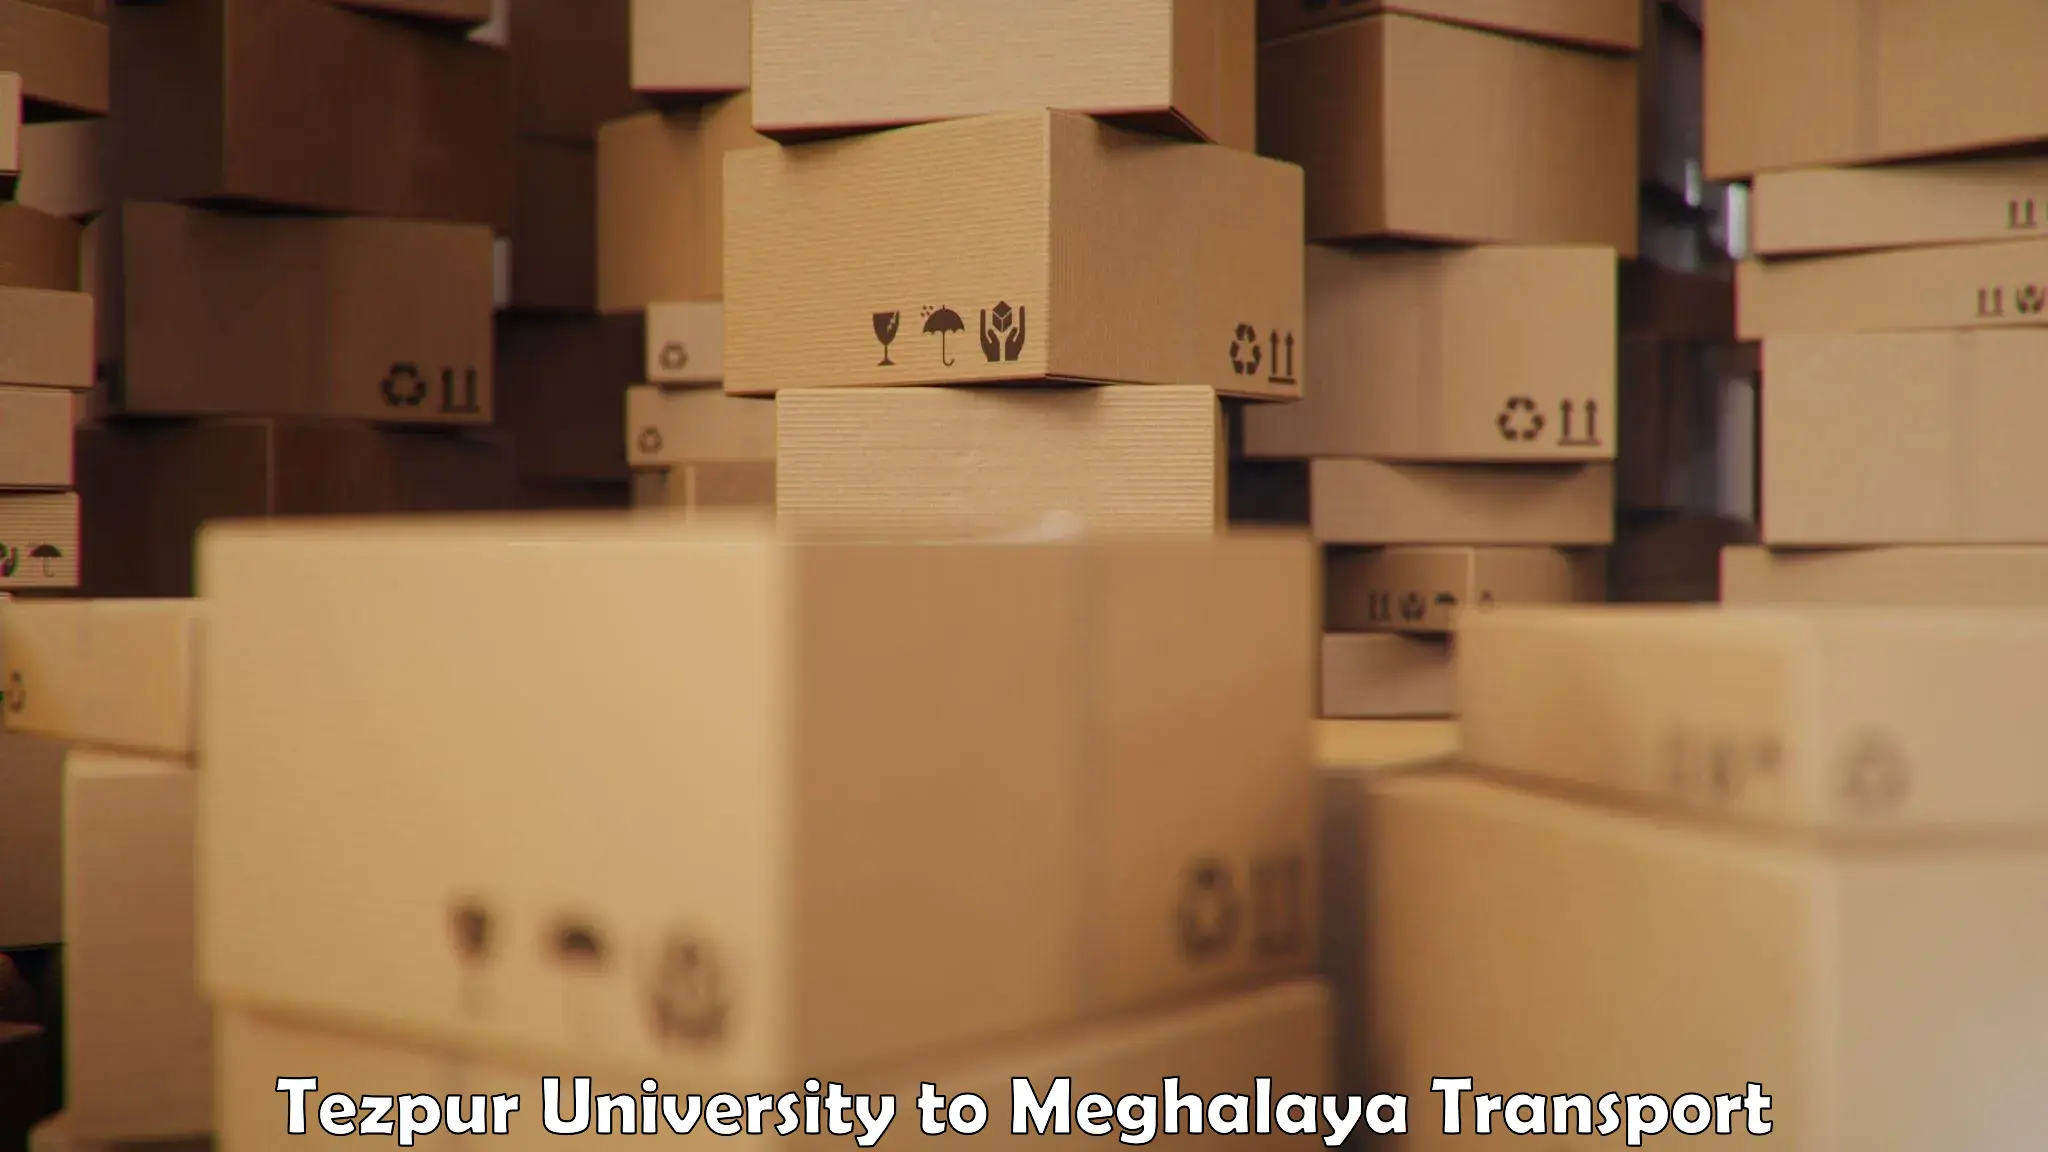 Material transport services Tezpur University to Shillong